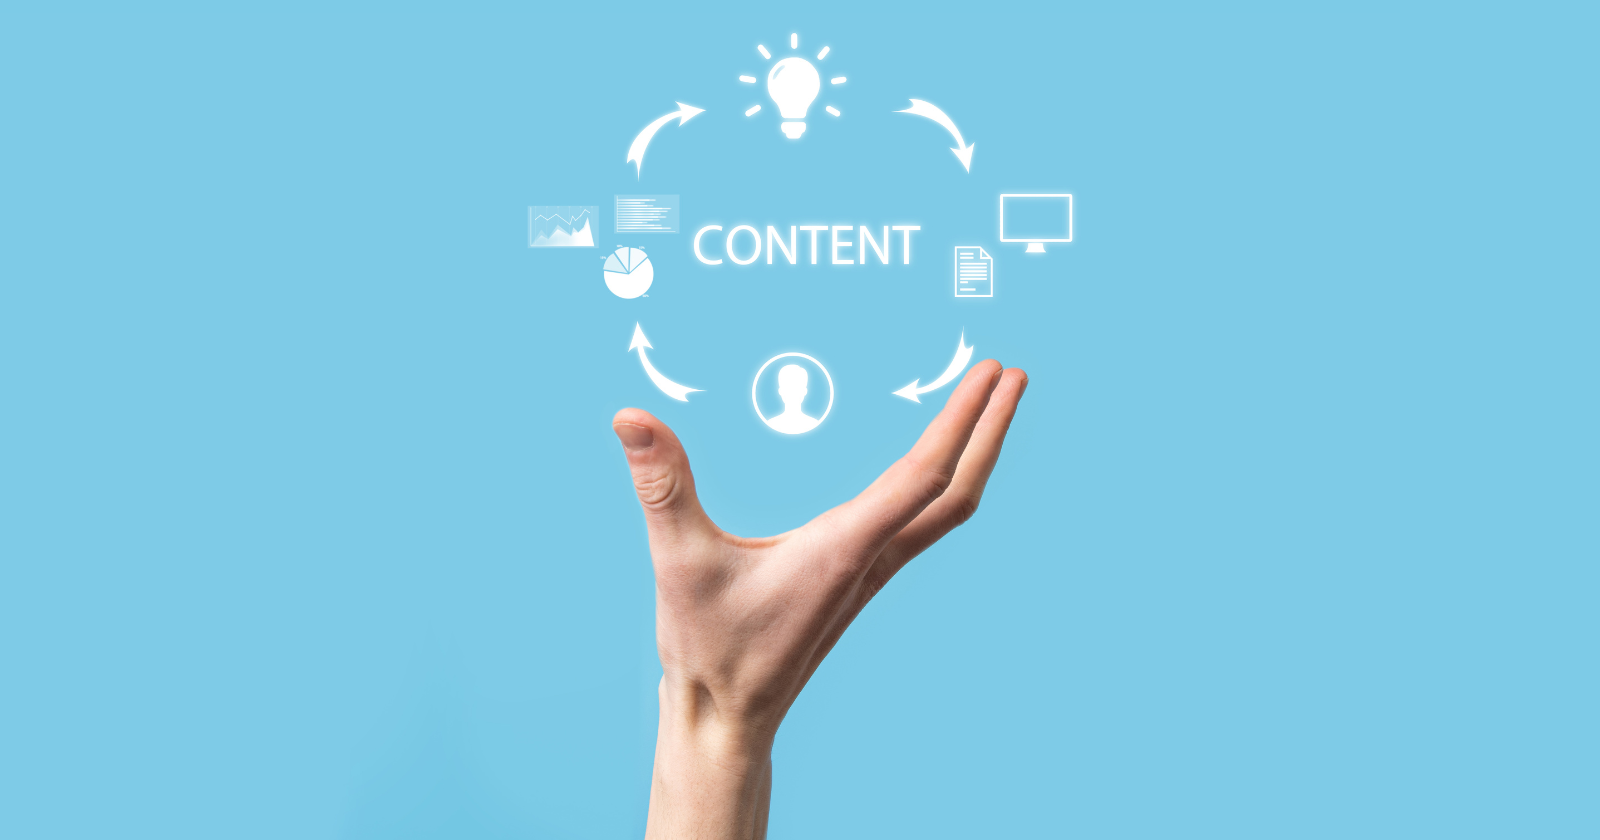 6 Things to Look for in an Ideal Content Management System